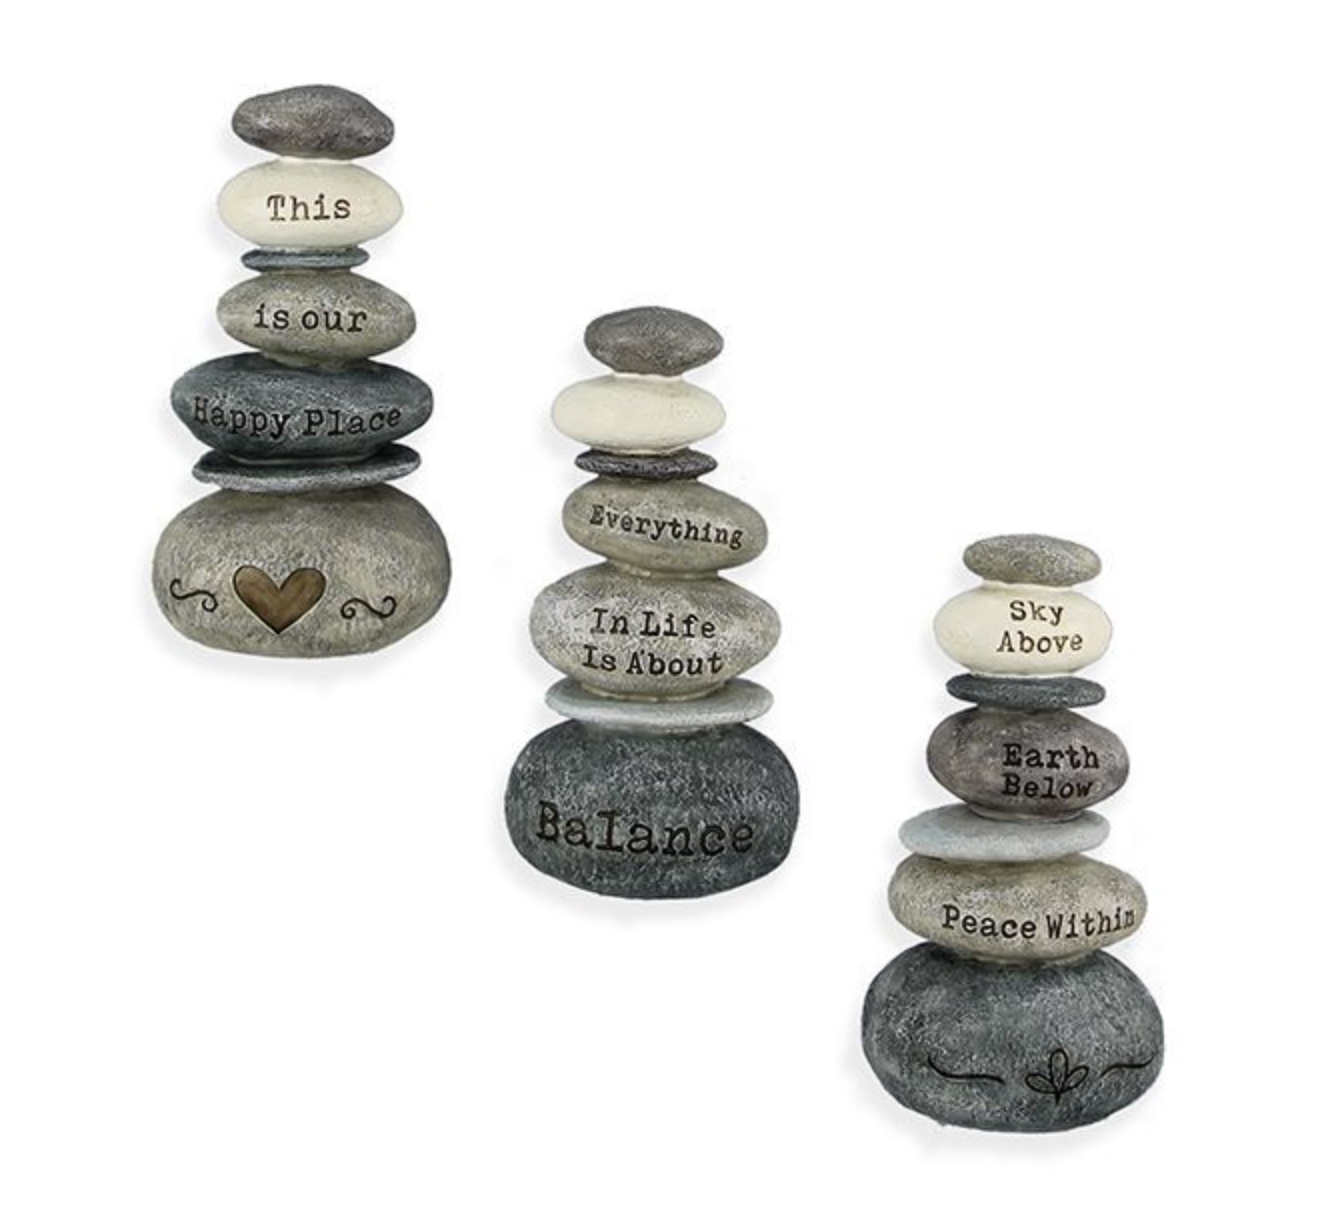 Inspirational Stacking Rocks, Set of 3 – The First Best Thing Farms